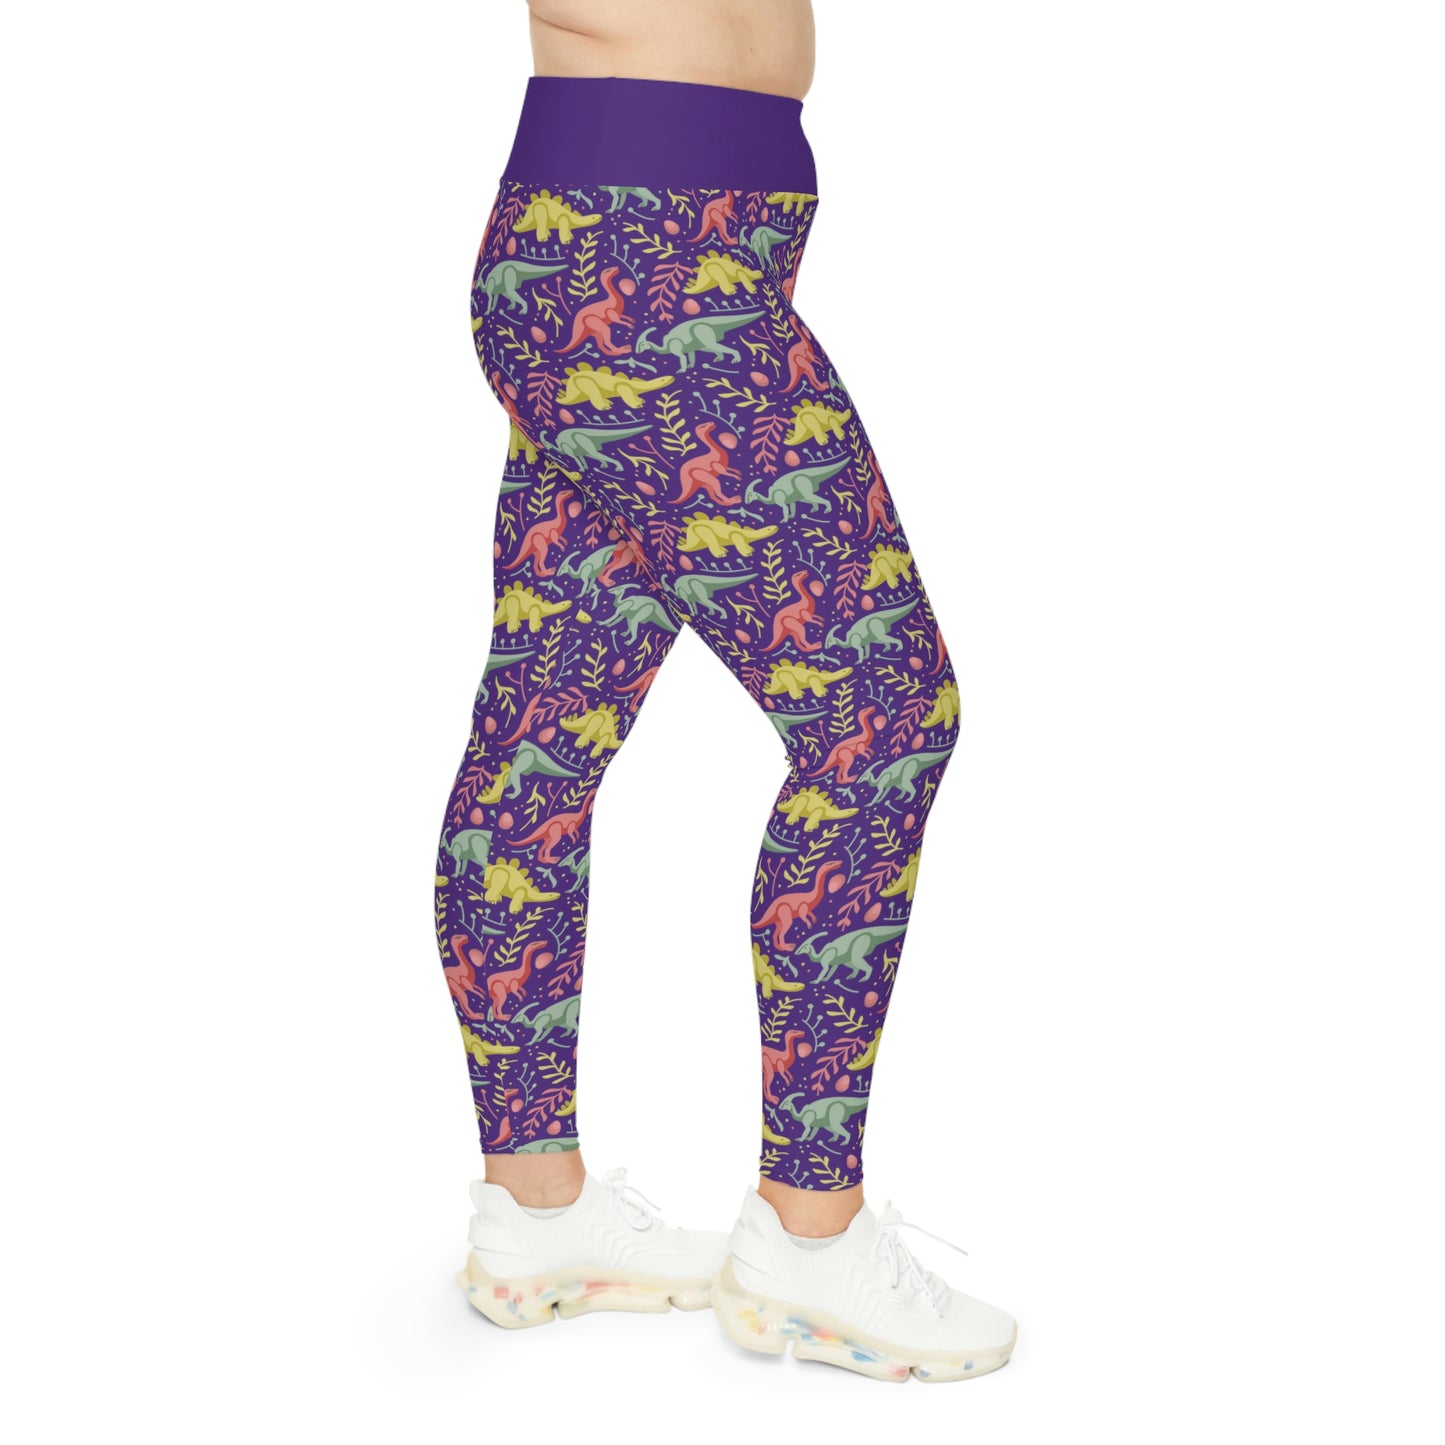 Plus Size Dinosaur Trex Jurassic Park Leggings, One of a Kind - Workout Activewear tights for Wife, Best Friend . Mothers Day or Christmas Gift